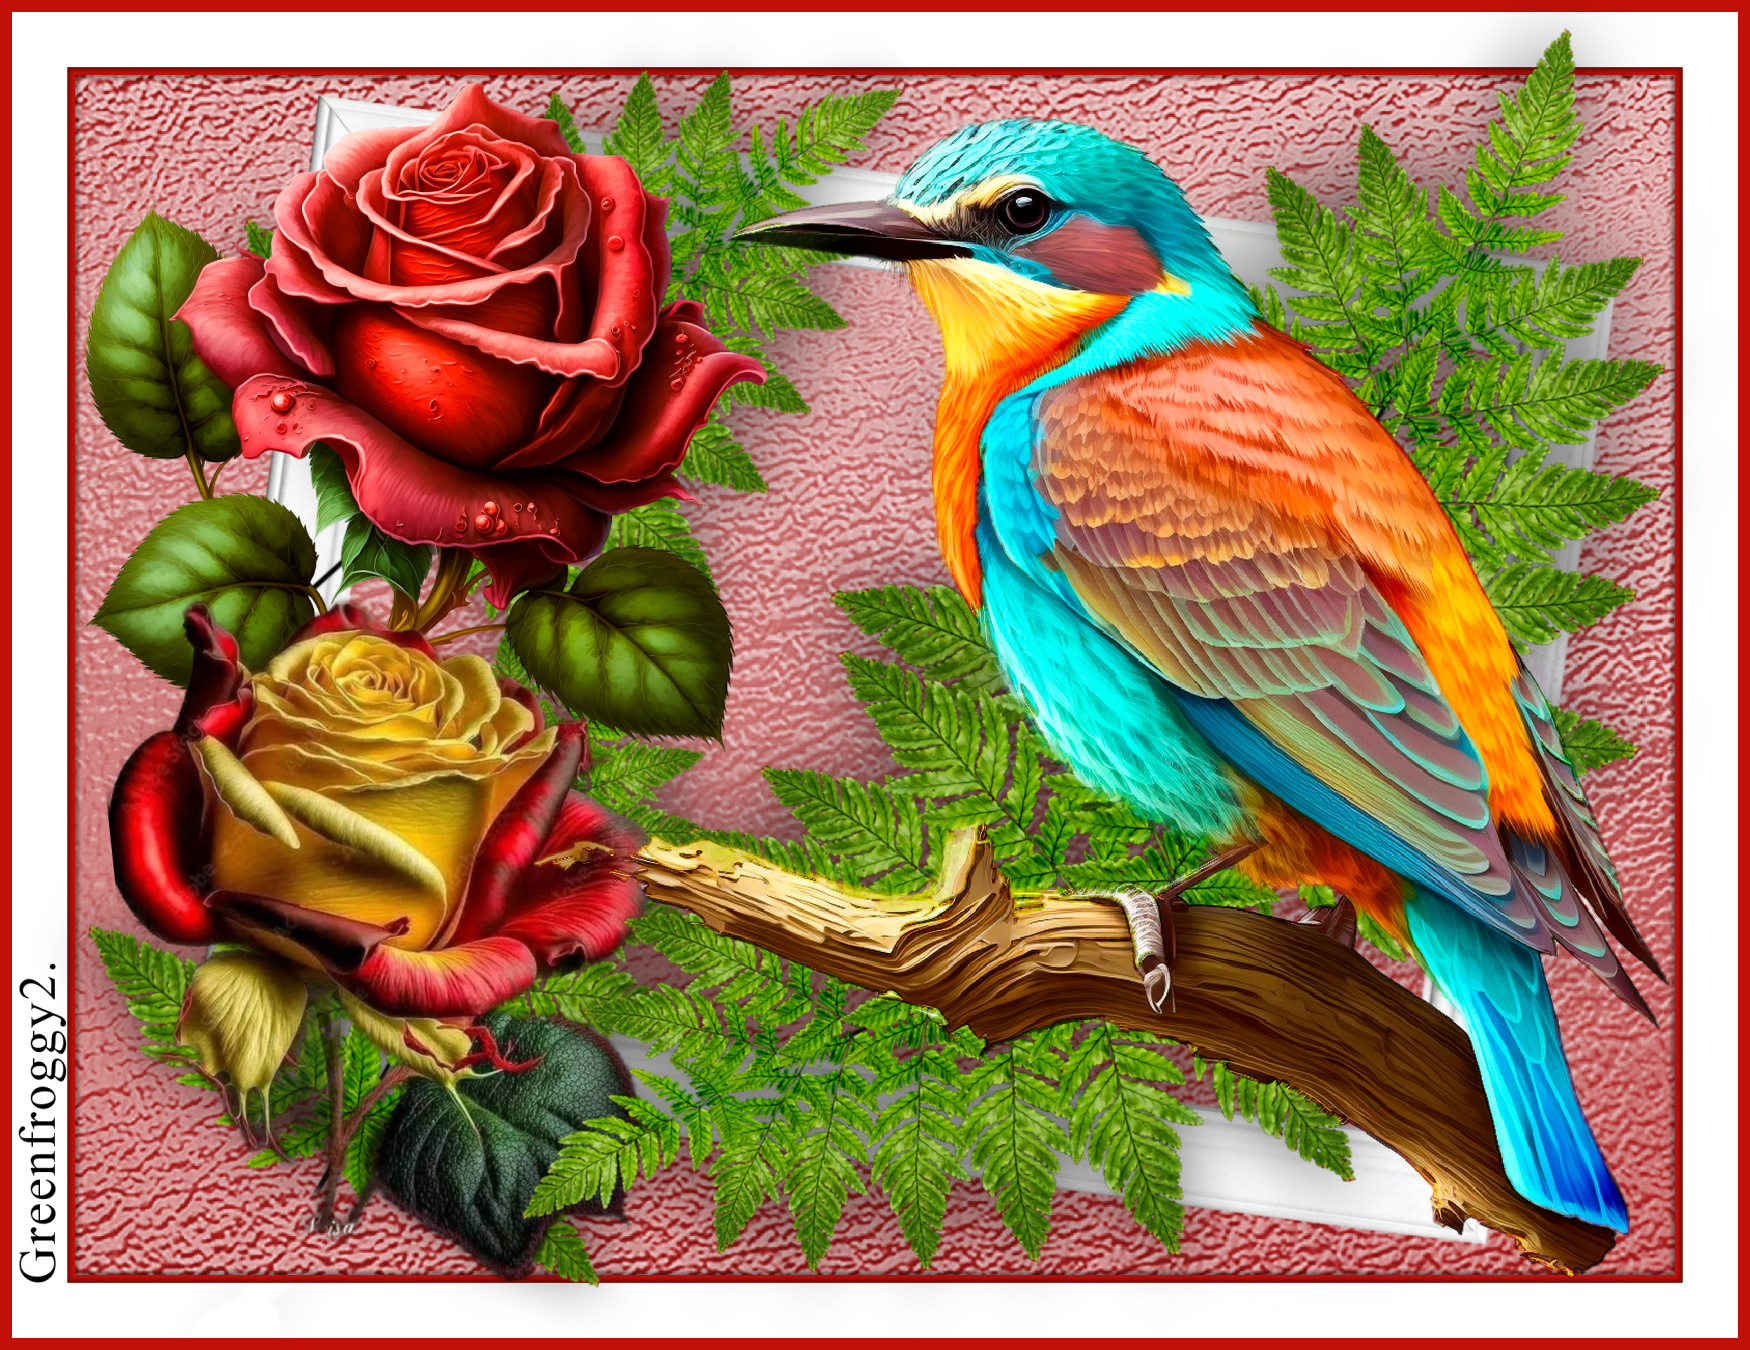 BIRD AND ROSES by GREENFROGGY1